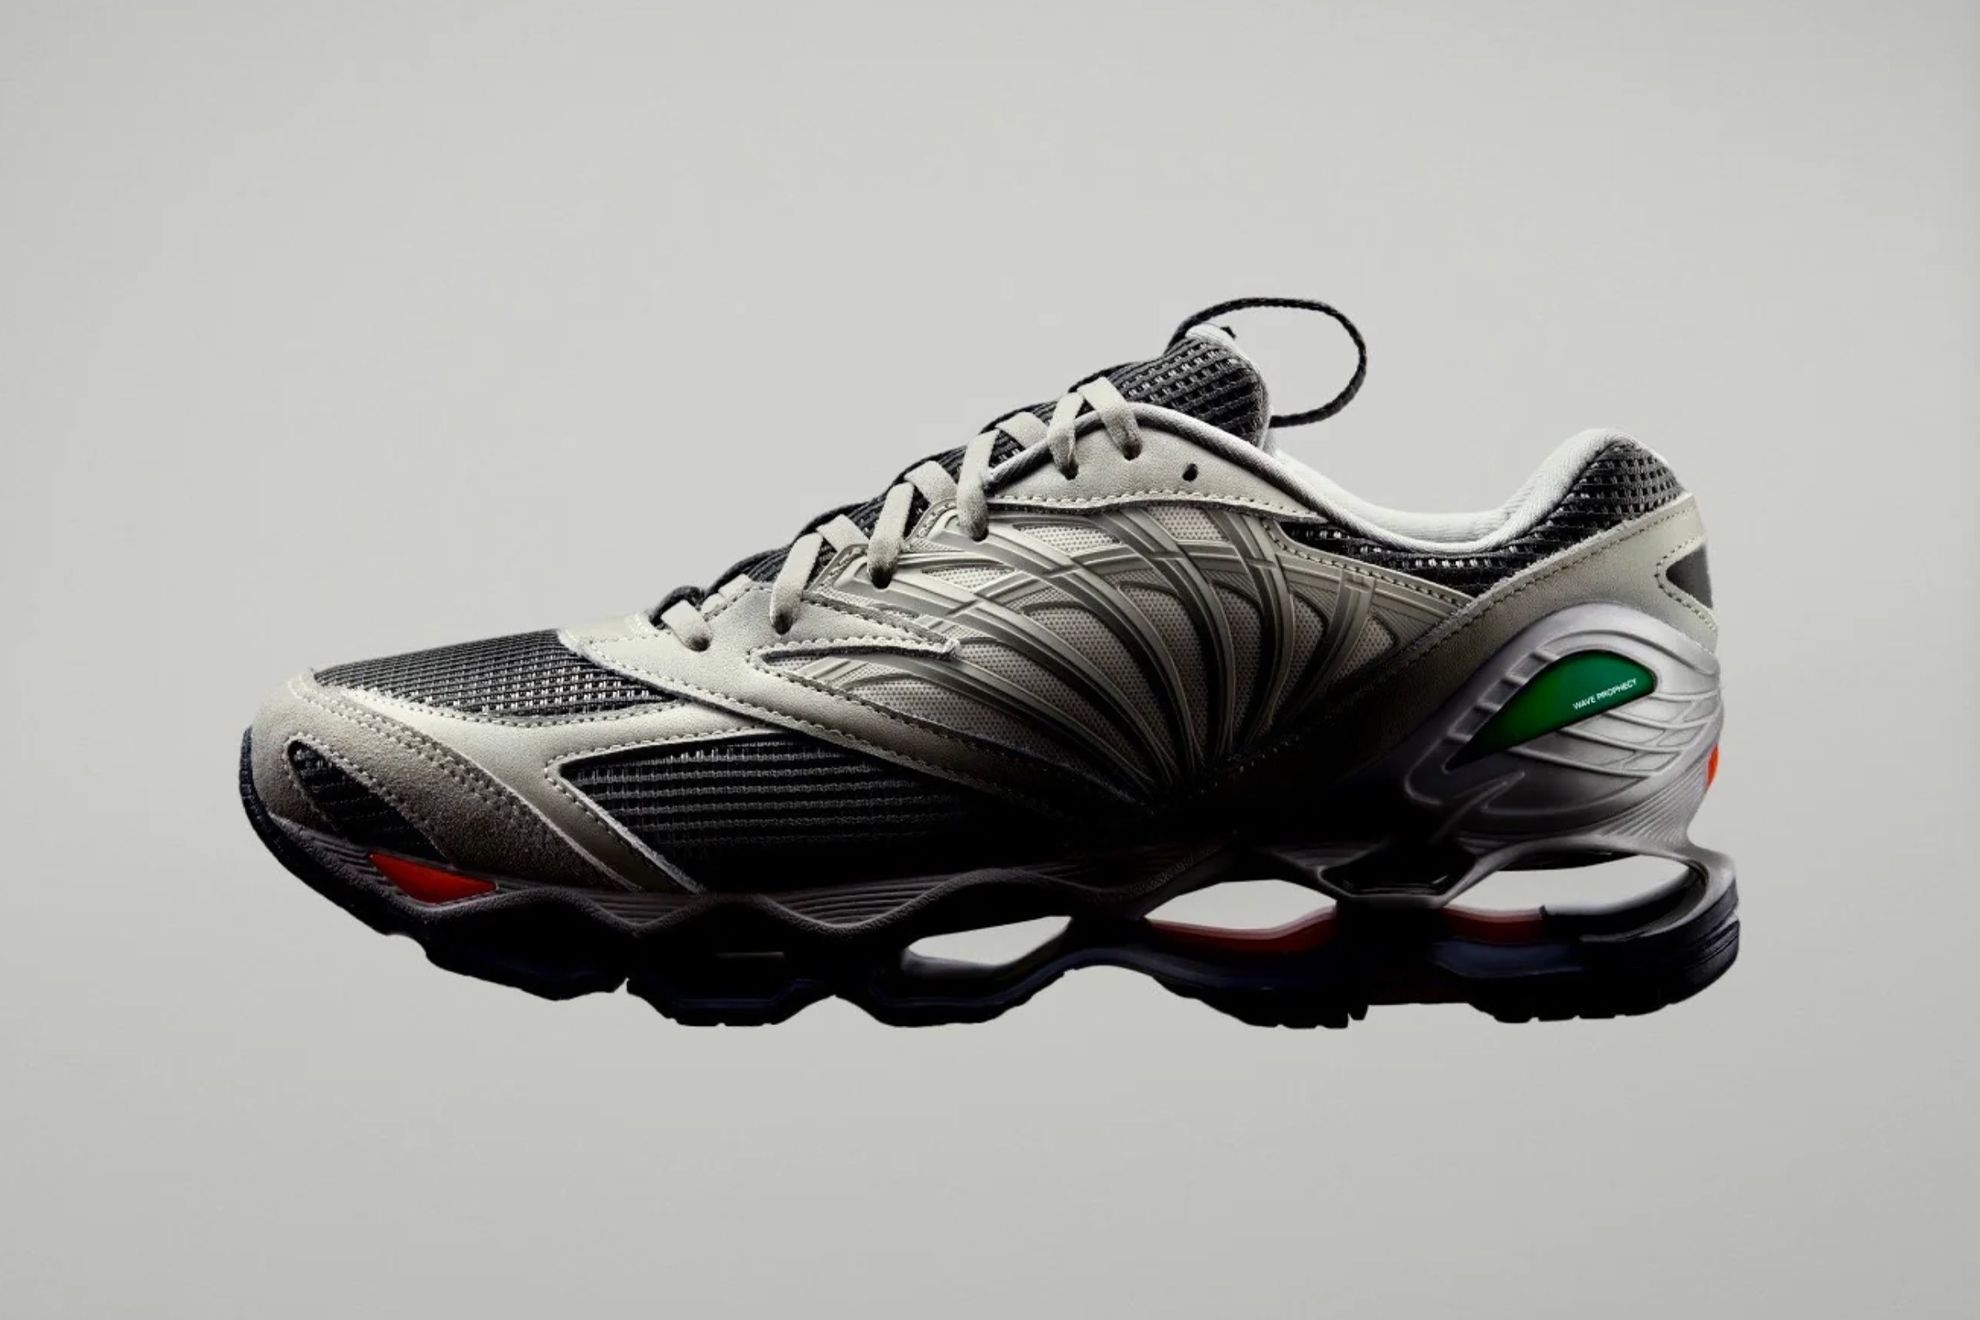 Graphpaper and Mizuno Celebrate With Another Wave Prophecy 8